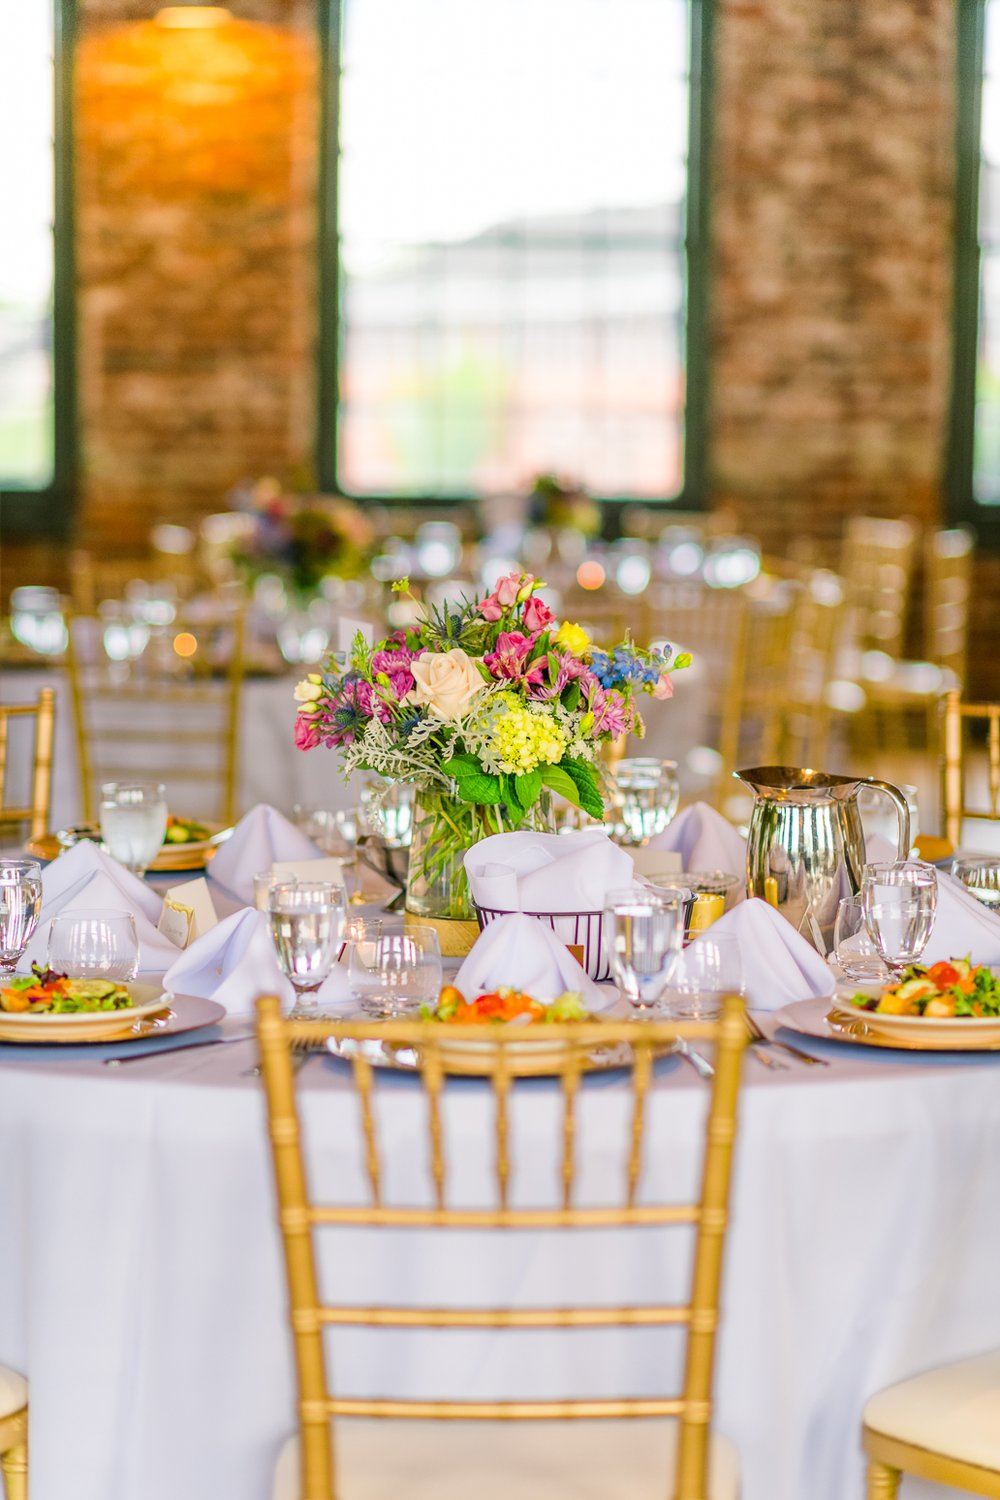 WoolenMill_TheSIlkMill_FredericksburgWeddingVenue_DowntownFredericksburg_VirginiaWeddingVenue_Event_BridalShow2023_youseephotography_pic30.jpg